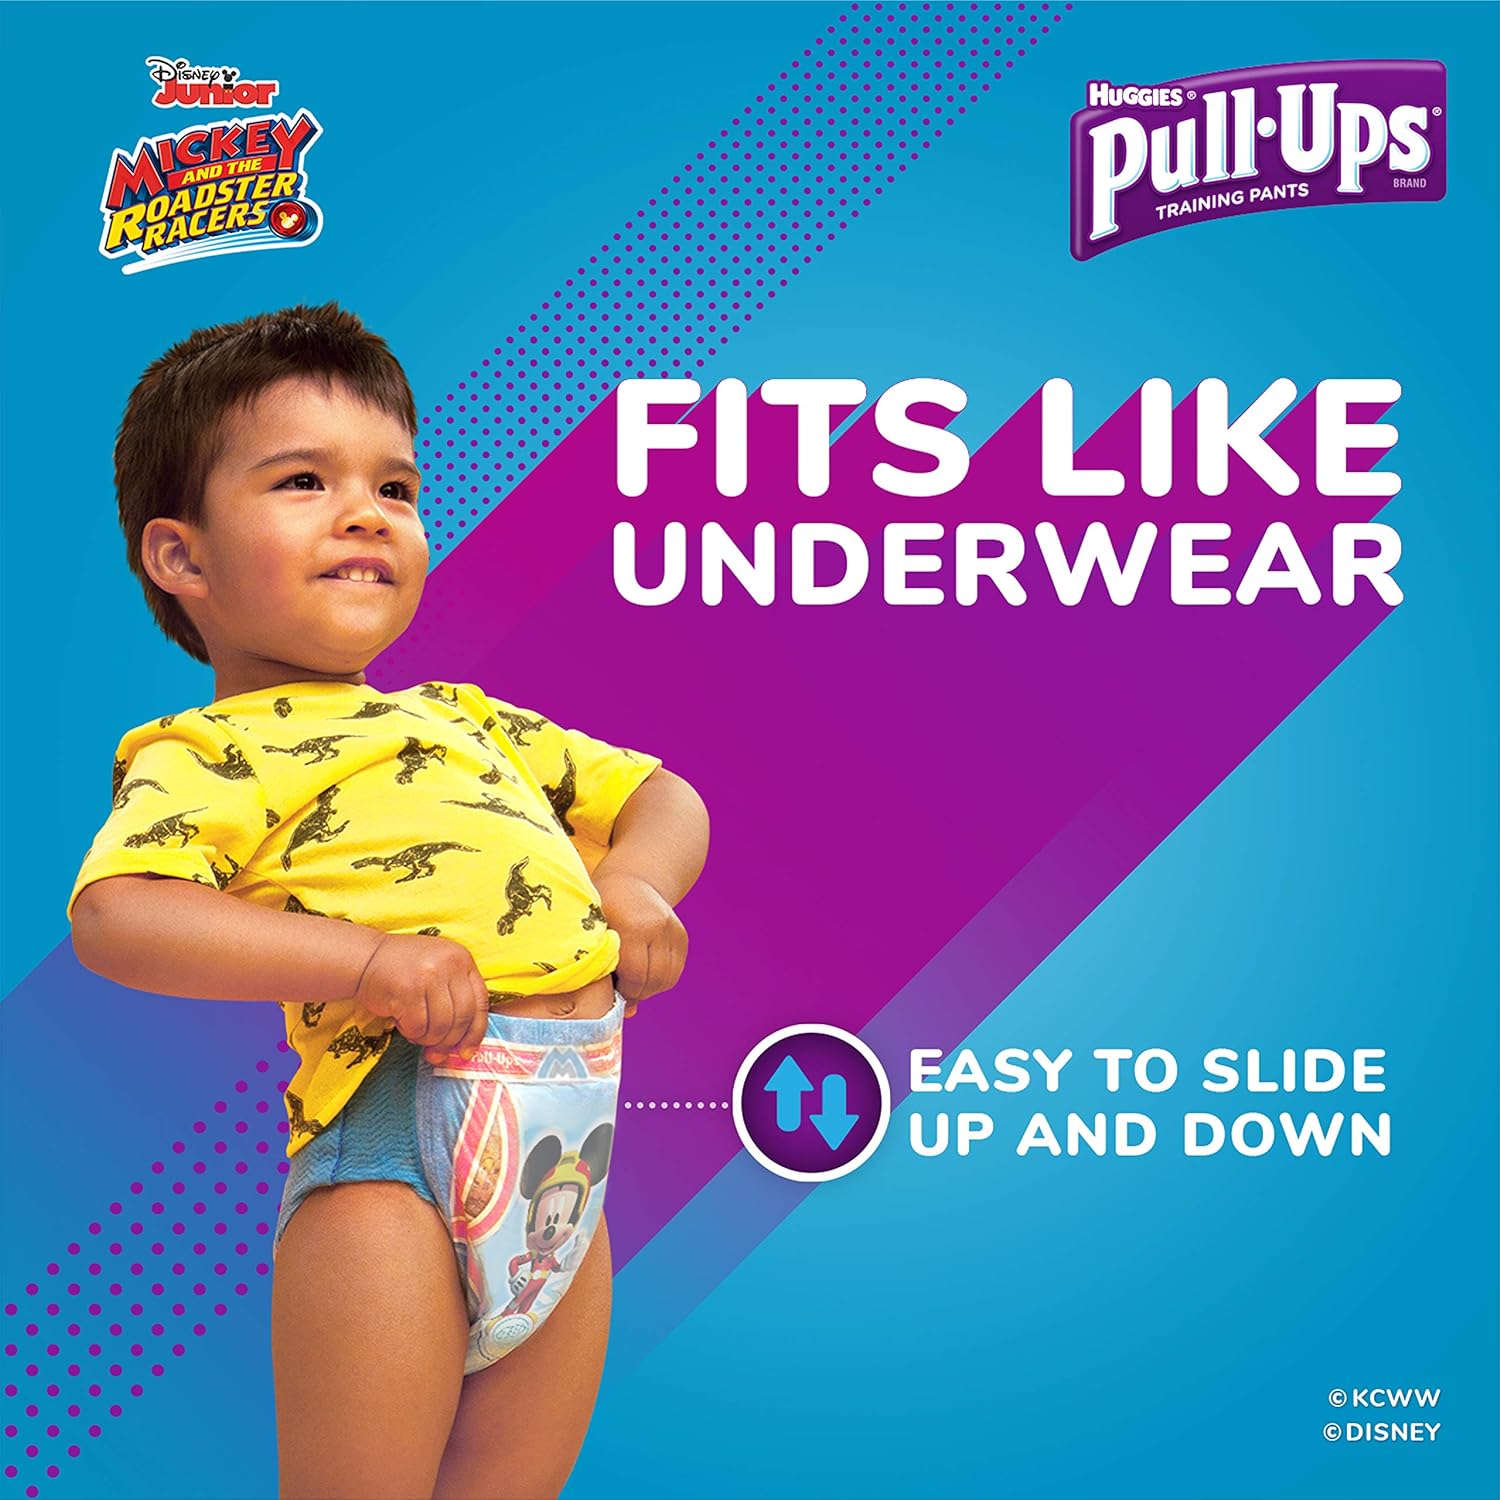 Pull-Ups Learning Designs Potty Training Pants for Boys, 4T-5T ( lb.), 18 Ct. (Packaging May Vary) - image 5 of 10